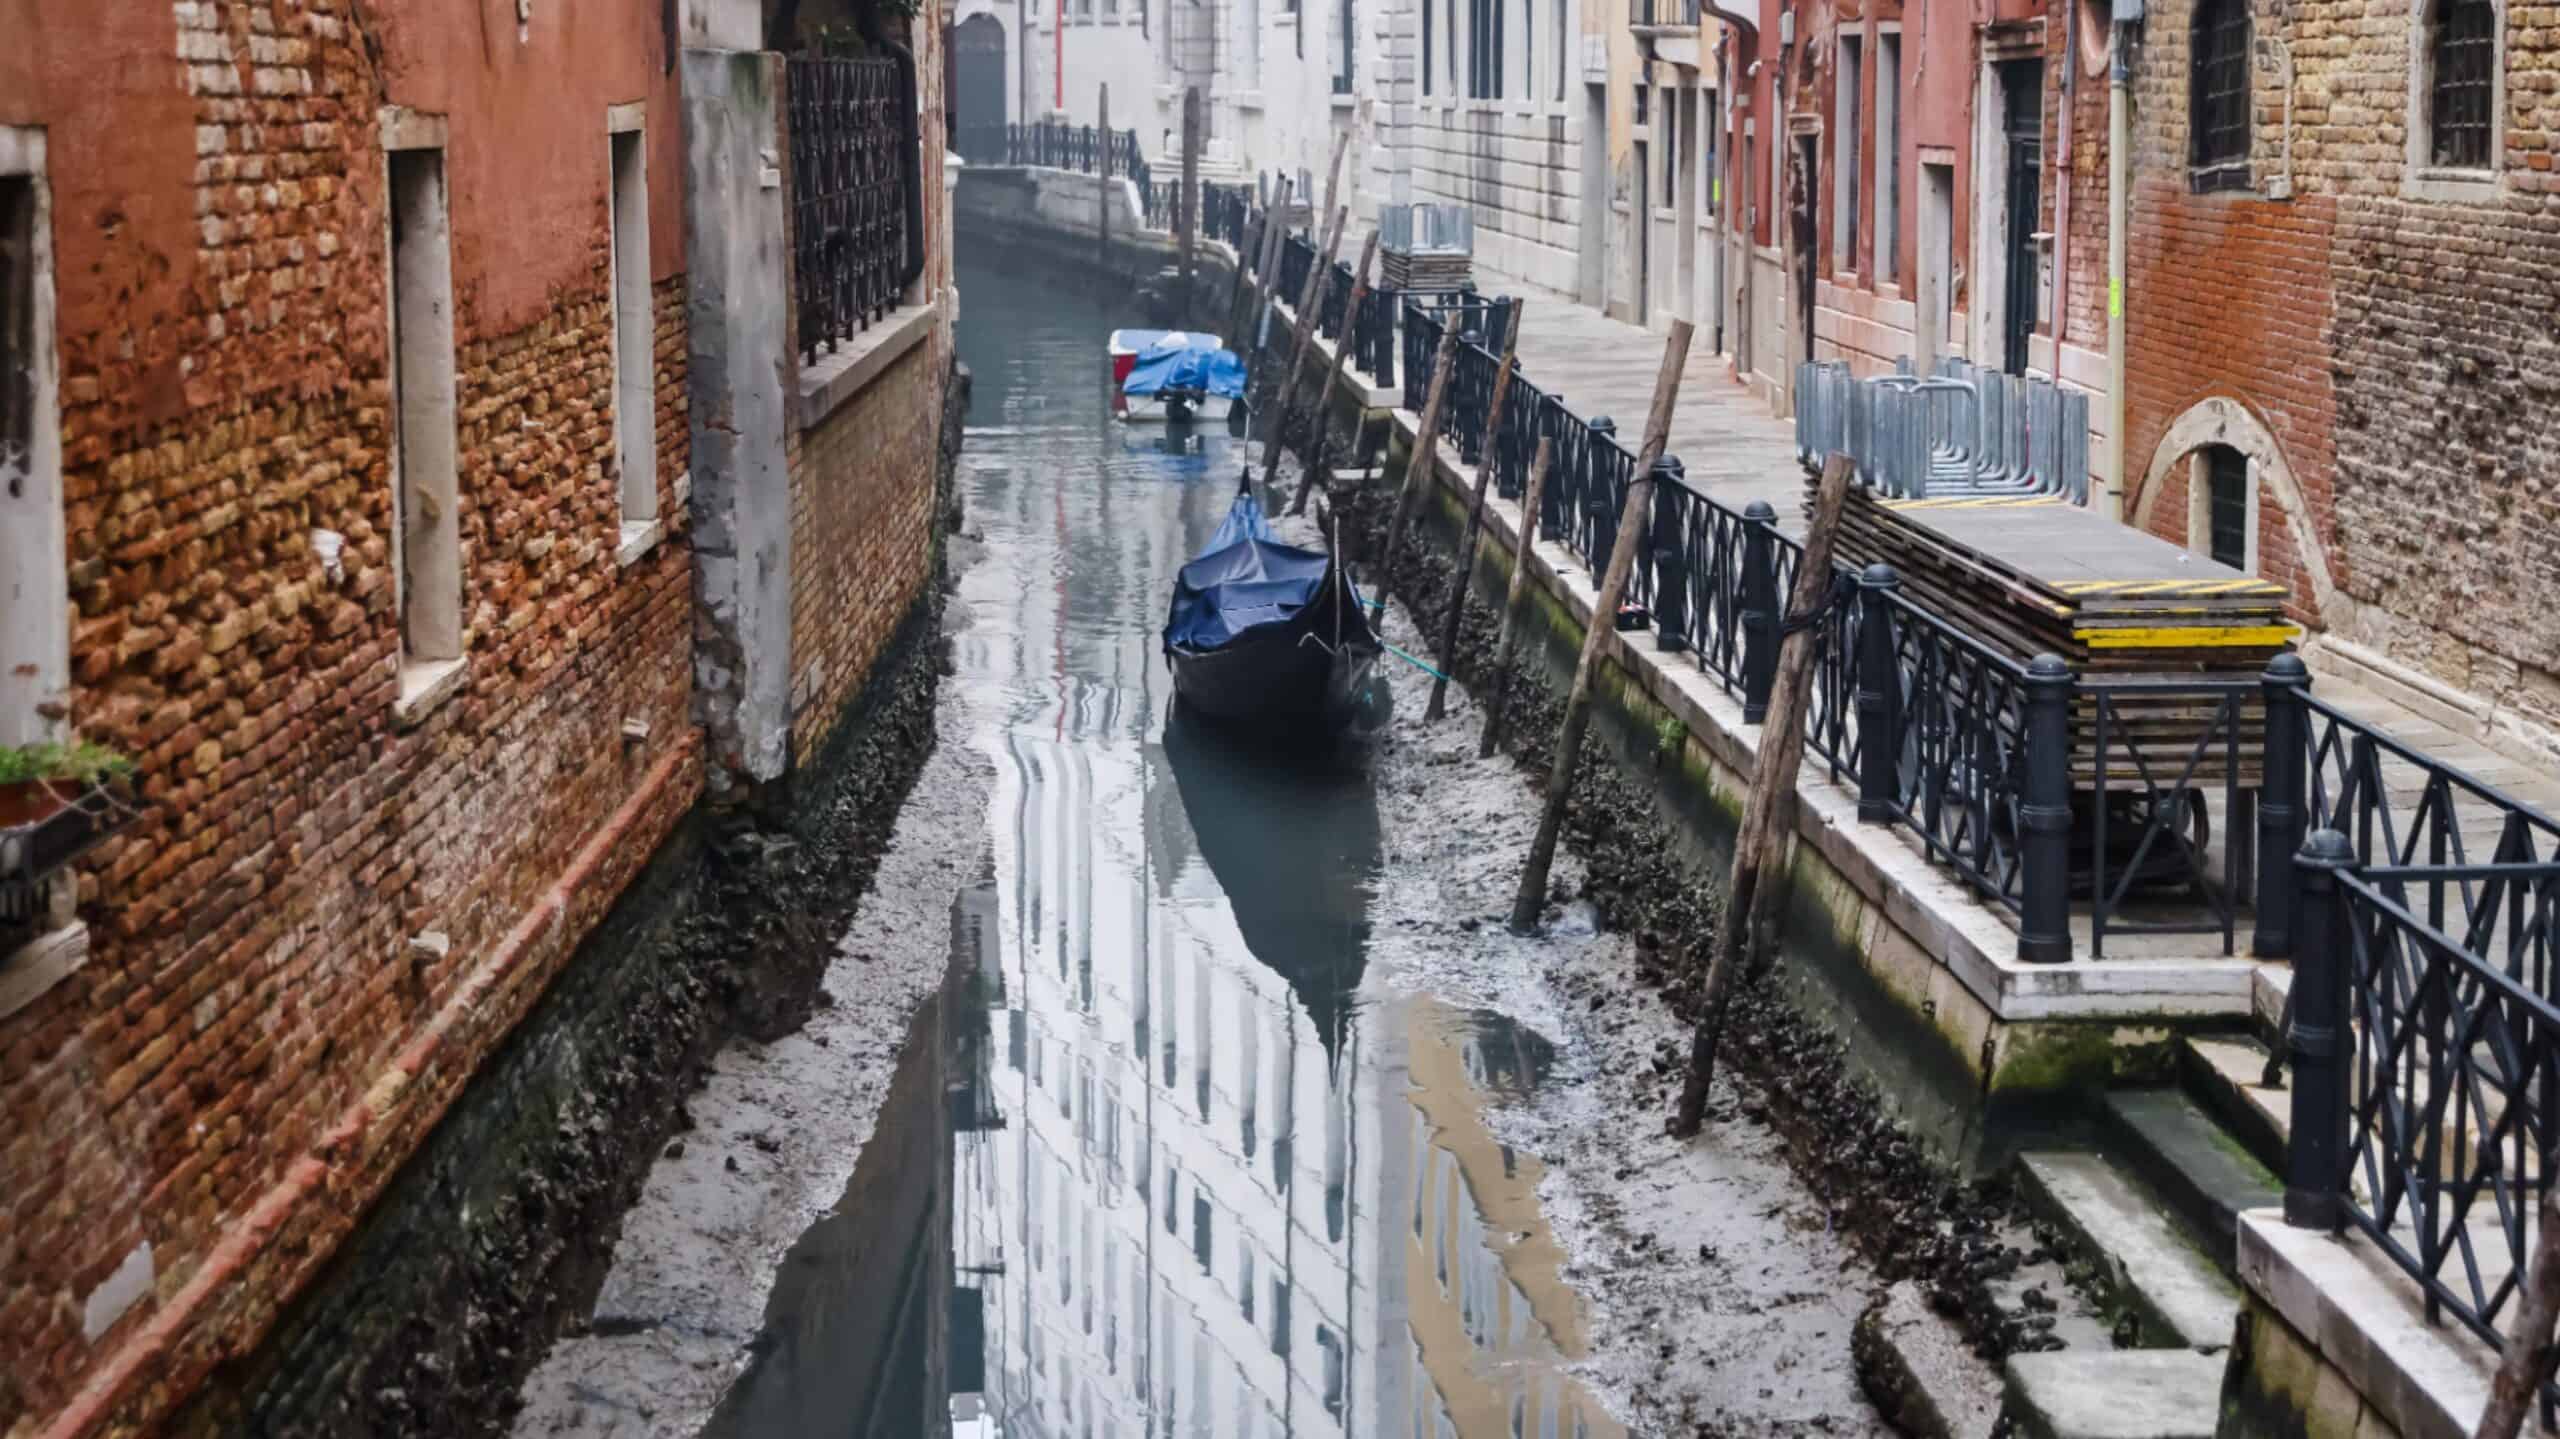 A Dry Canal At Low Tide In February In Venice, Italy © Alessandro Bremecnurphoto Via Getty Images